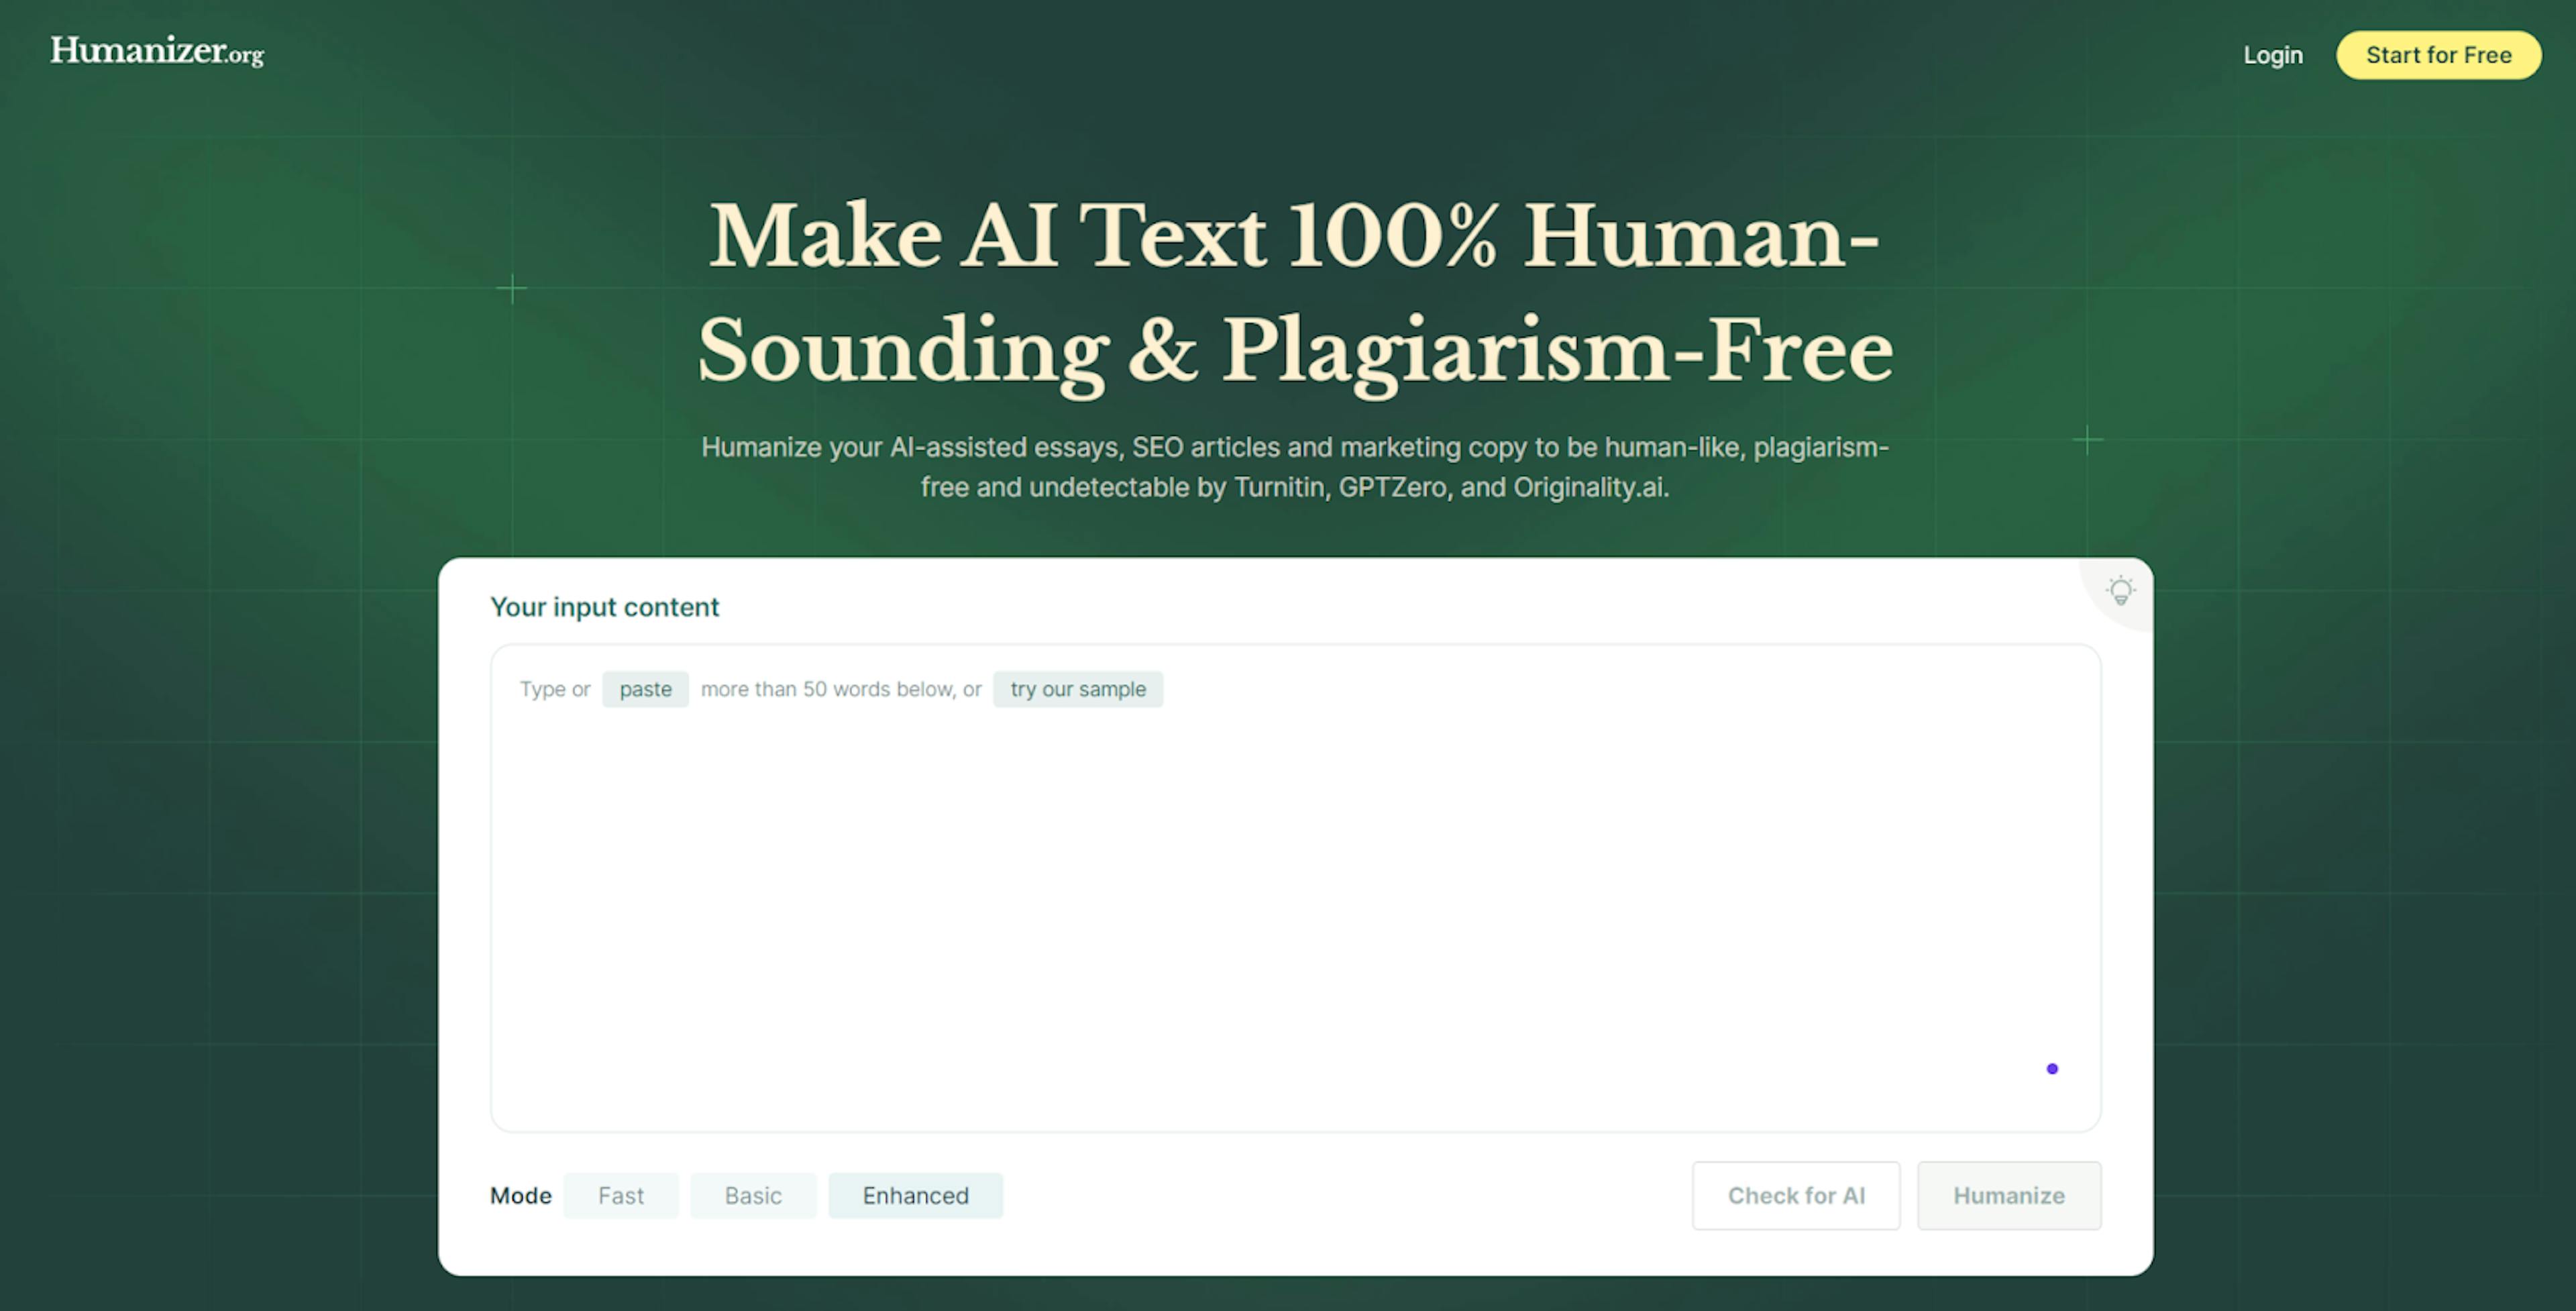 featured image - Humanizer.org Review: Make AI Content Undetectable for Free